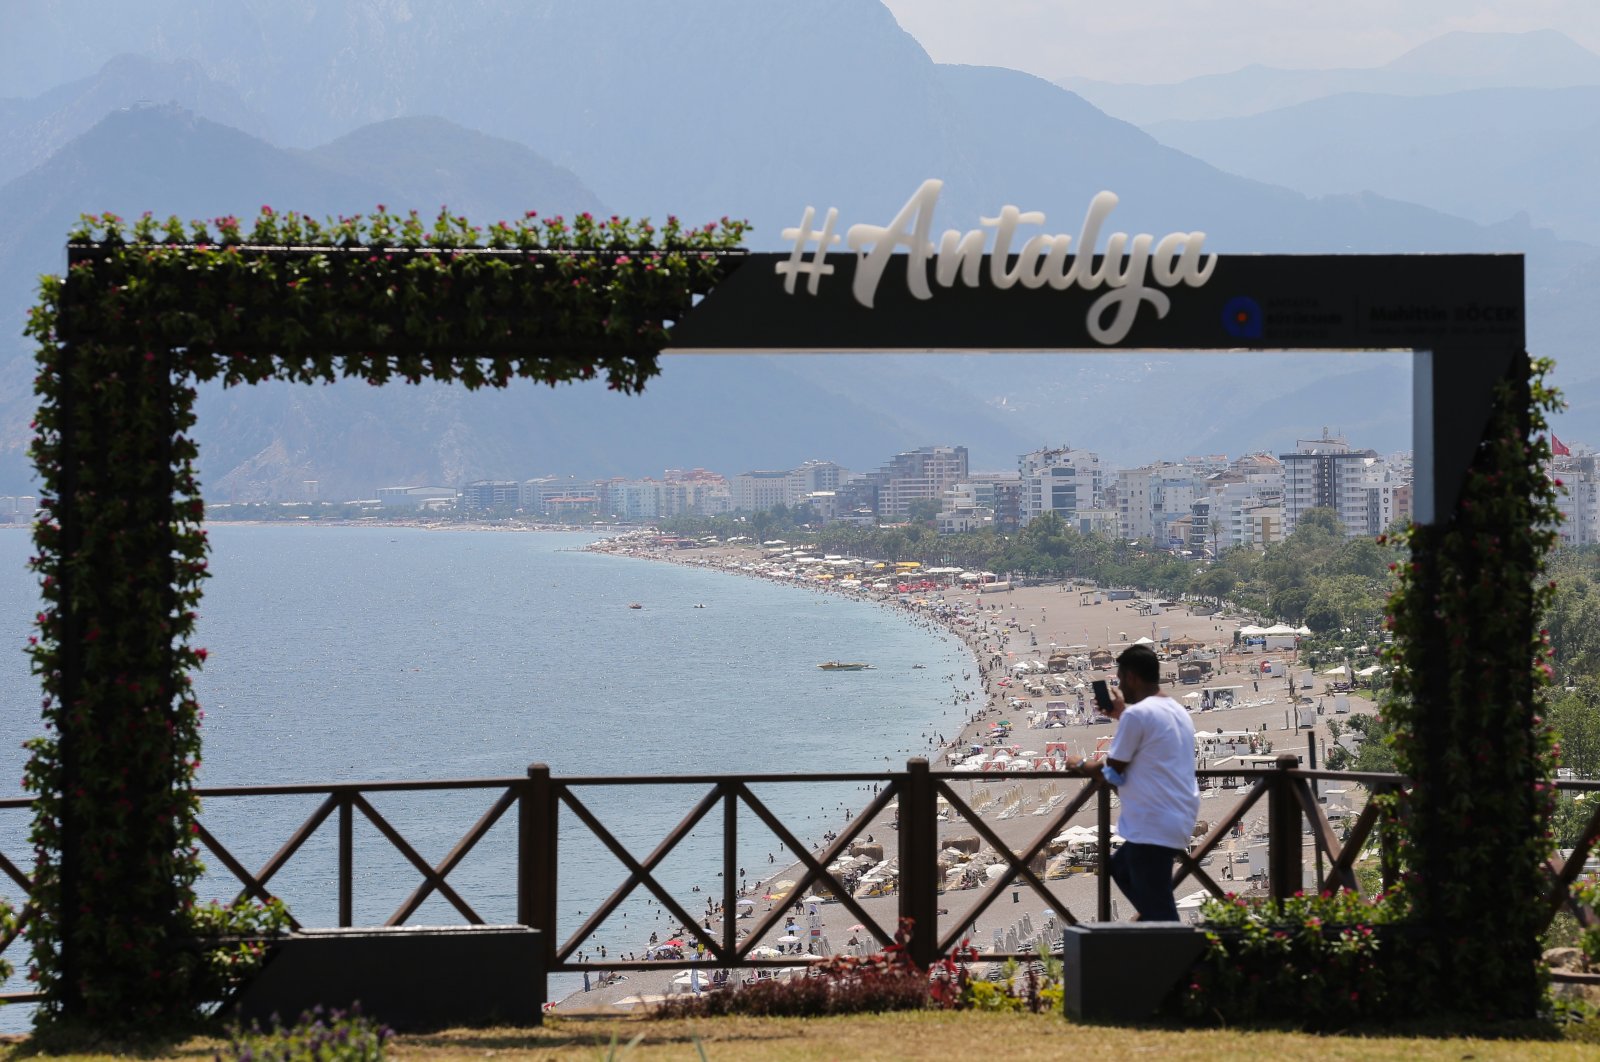 A sign that says "#Antalya" can be seen against a backdrop of a sandy beach and mountain ranges in Antalya, Turkey, June 28, 2021. (AA Photo)